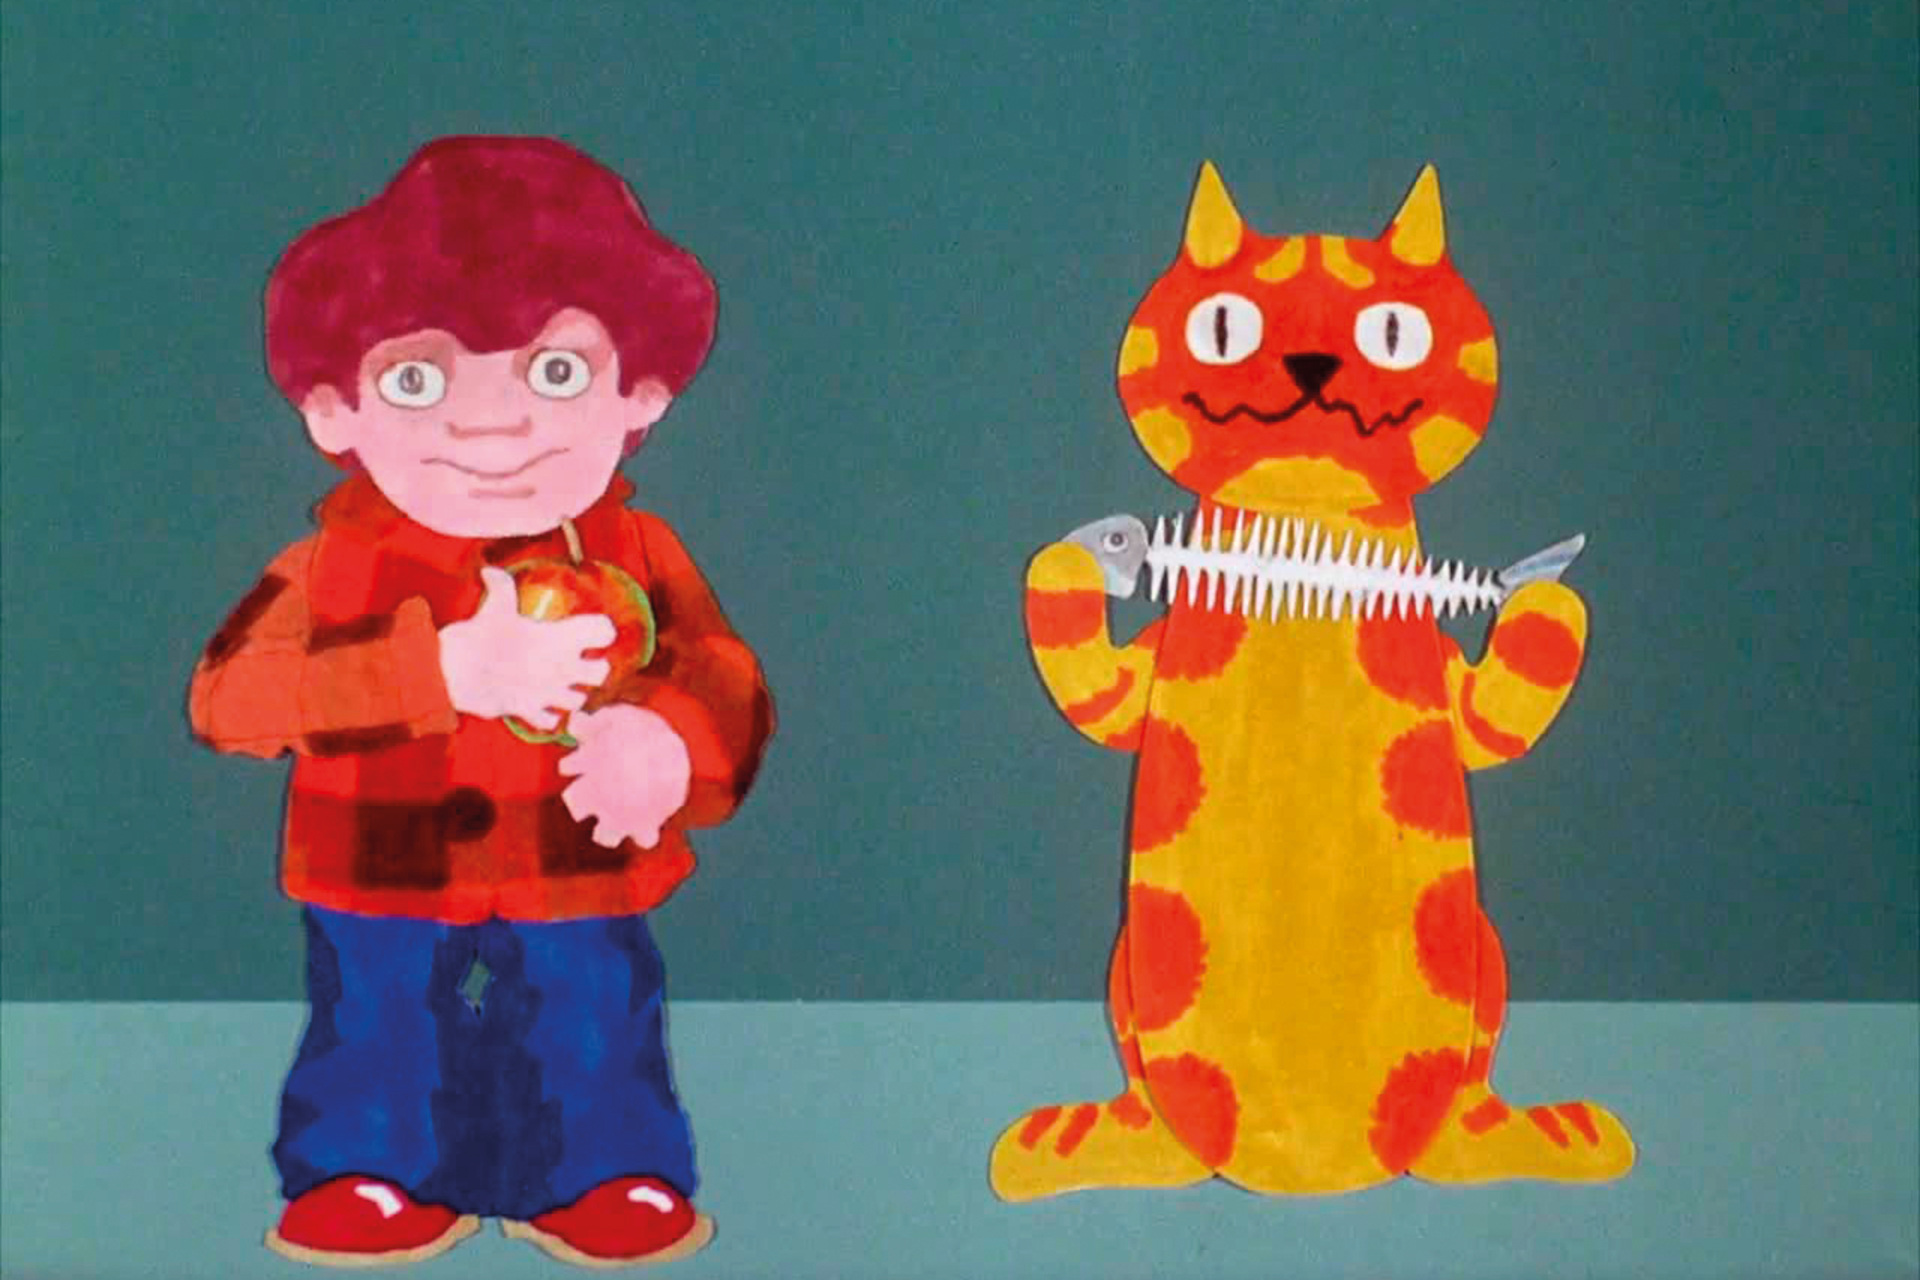 ‘Charley says...’, the former Central Office of Information’s campaign to help children learn road safety (Image: BFI - Crown)